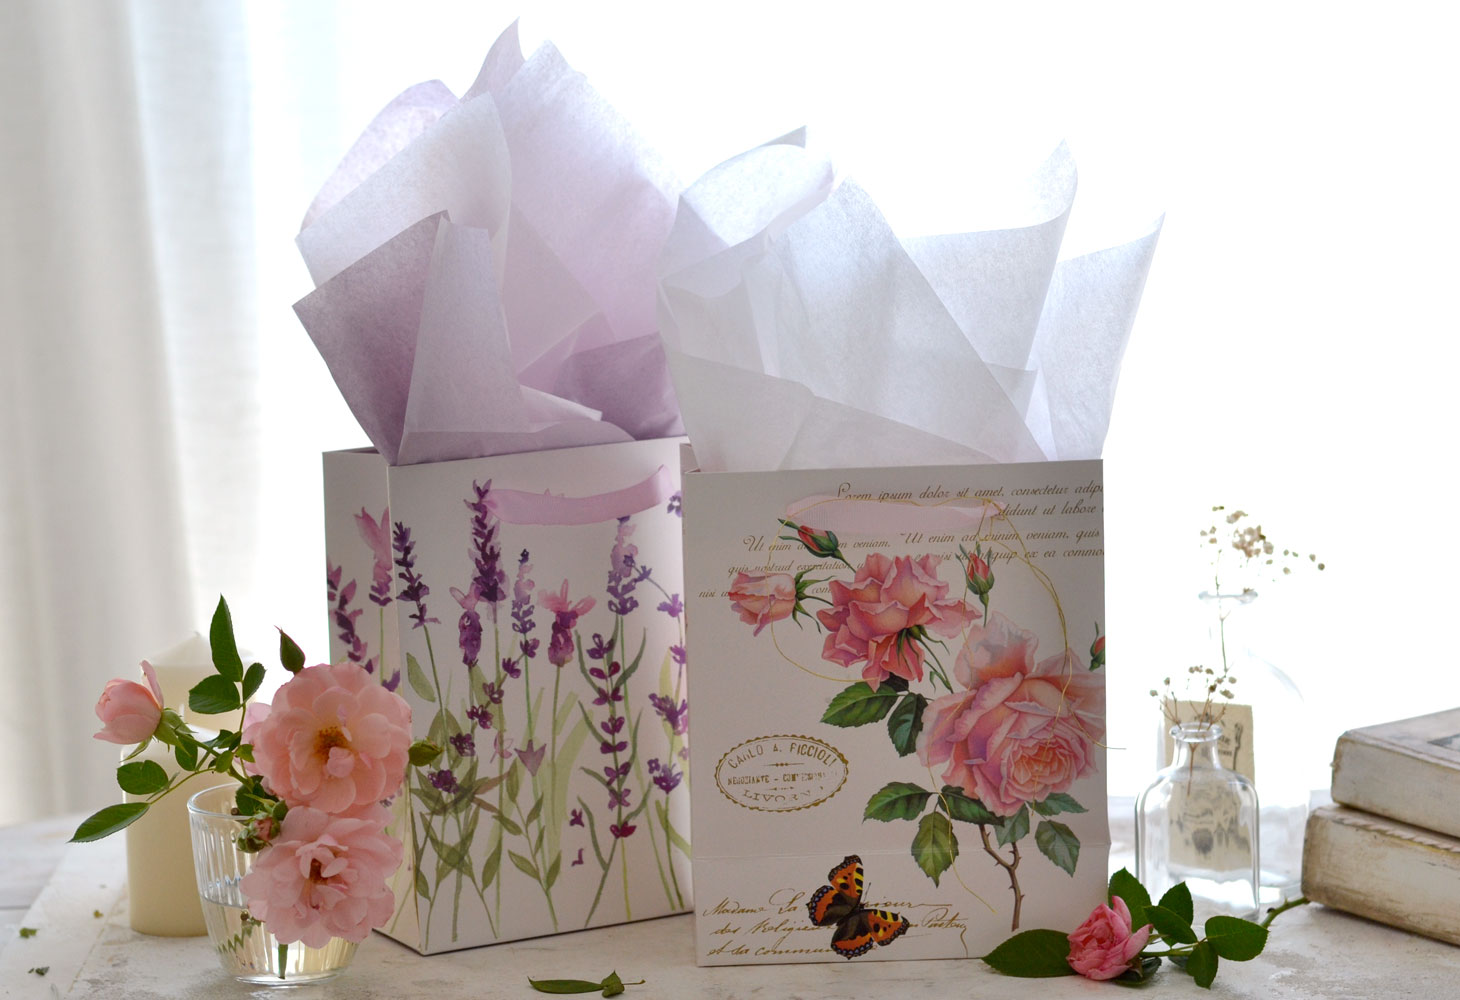 How to put Tissue Paper in a Gift Bag - The Graphics Fairy